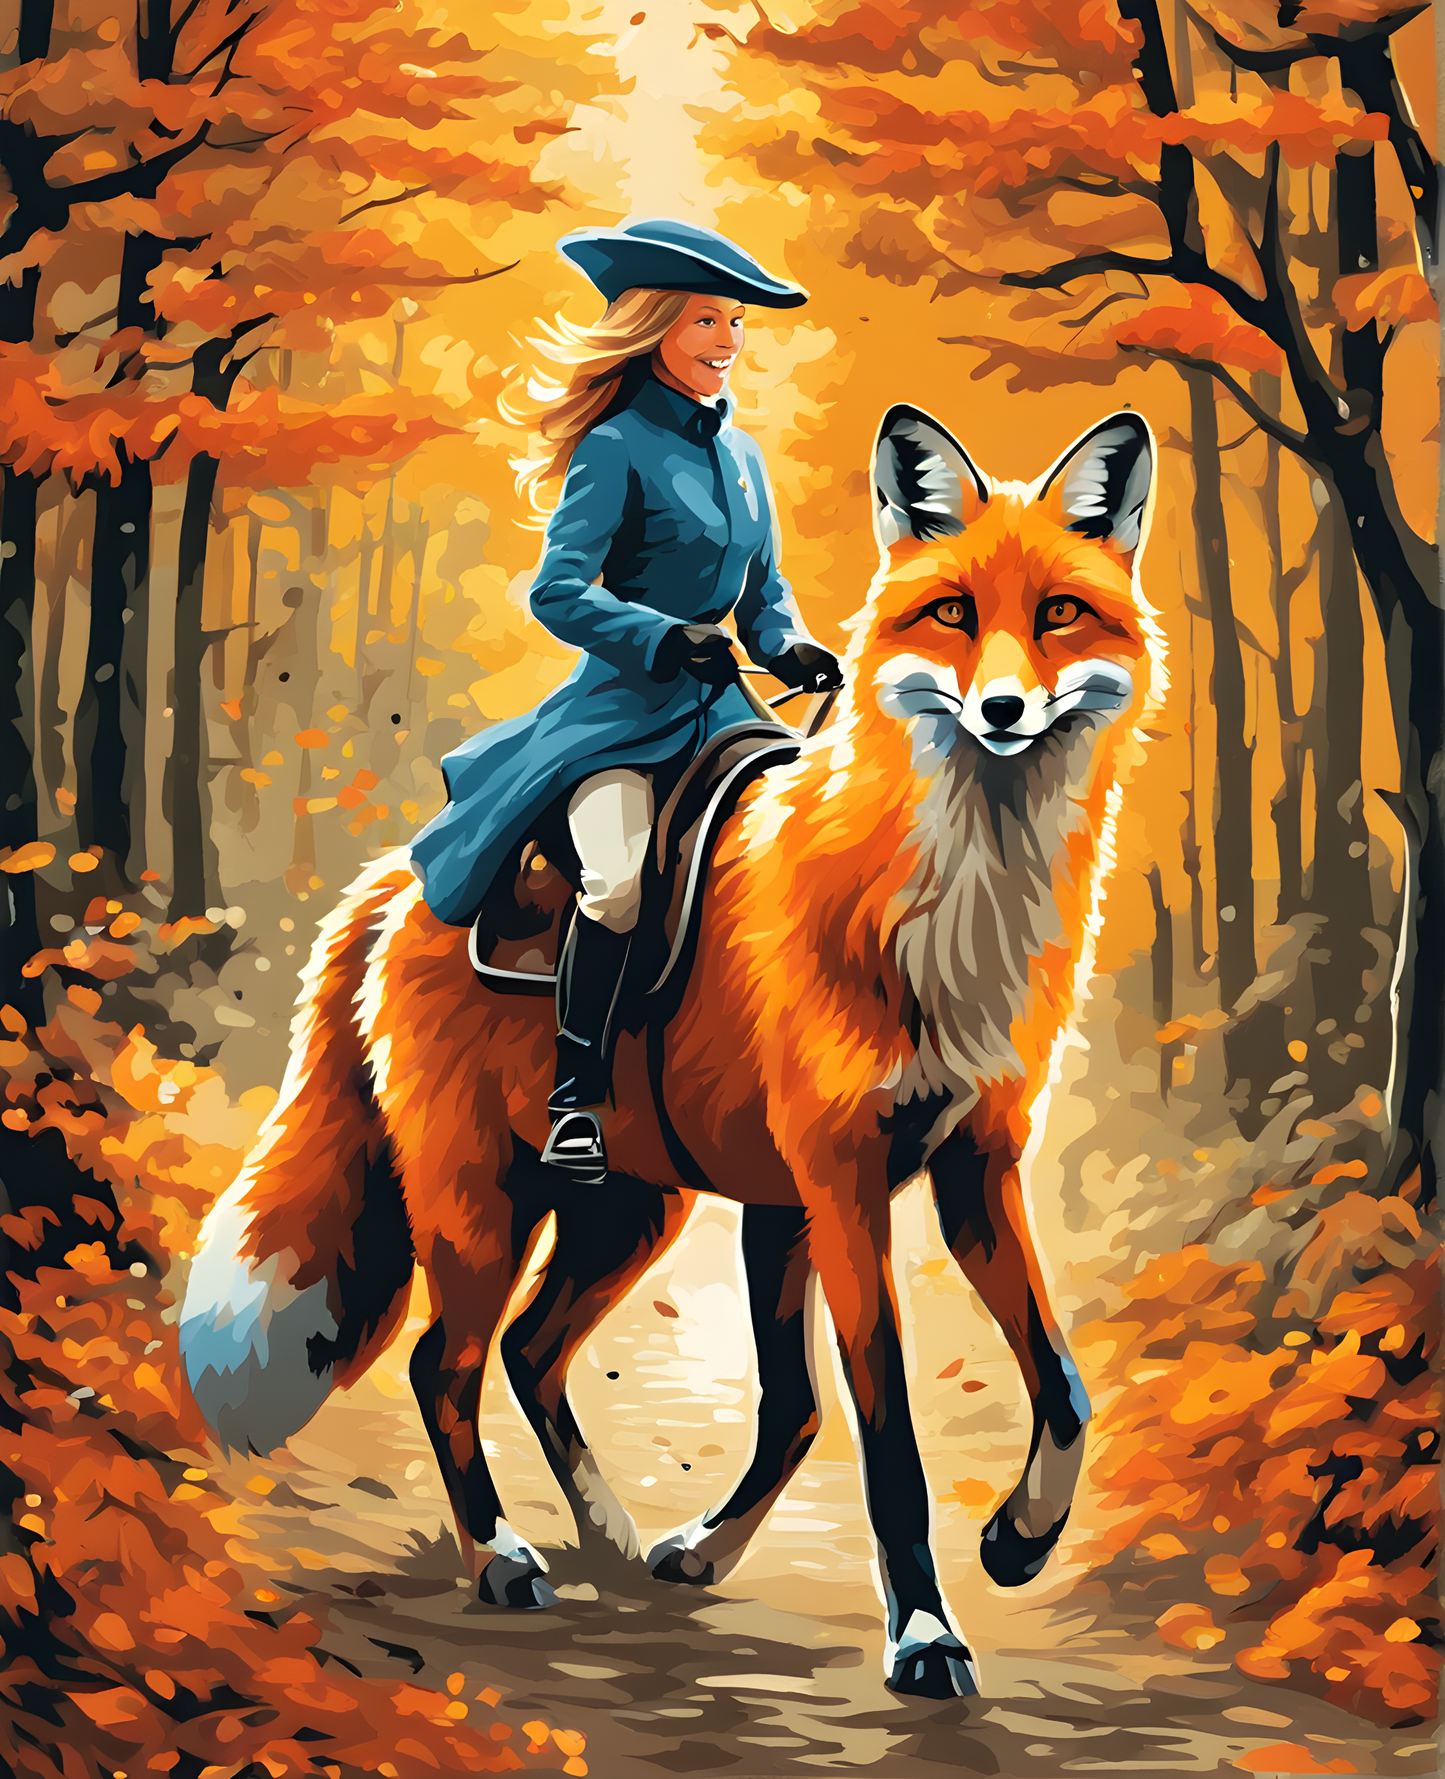 Riding on a Fox (4) - Van-Go Paint-By-Number Kit